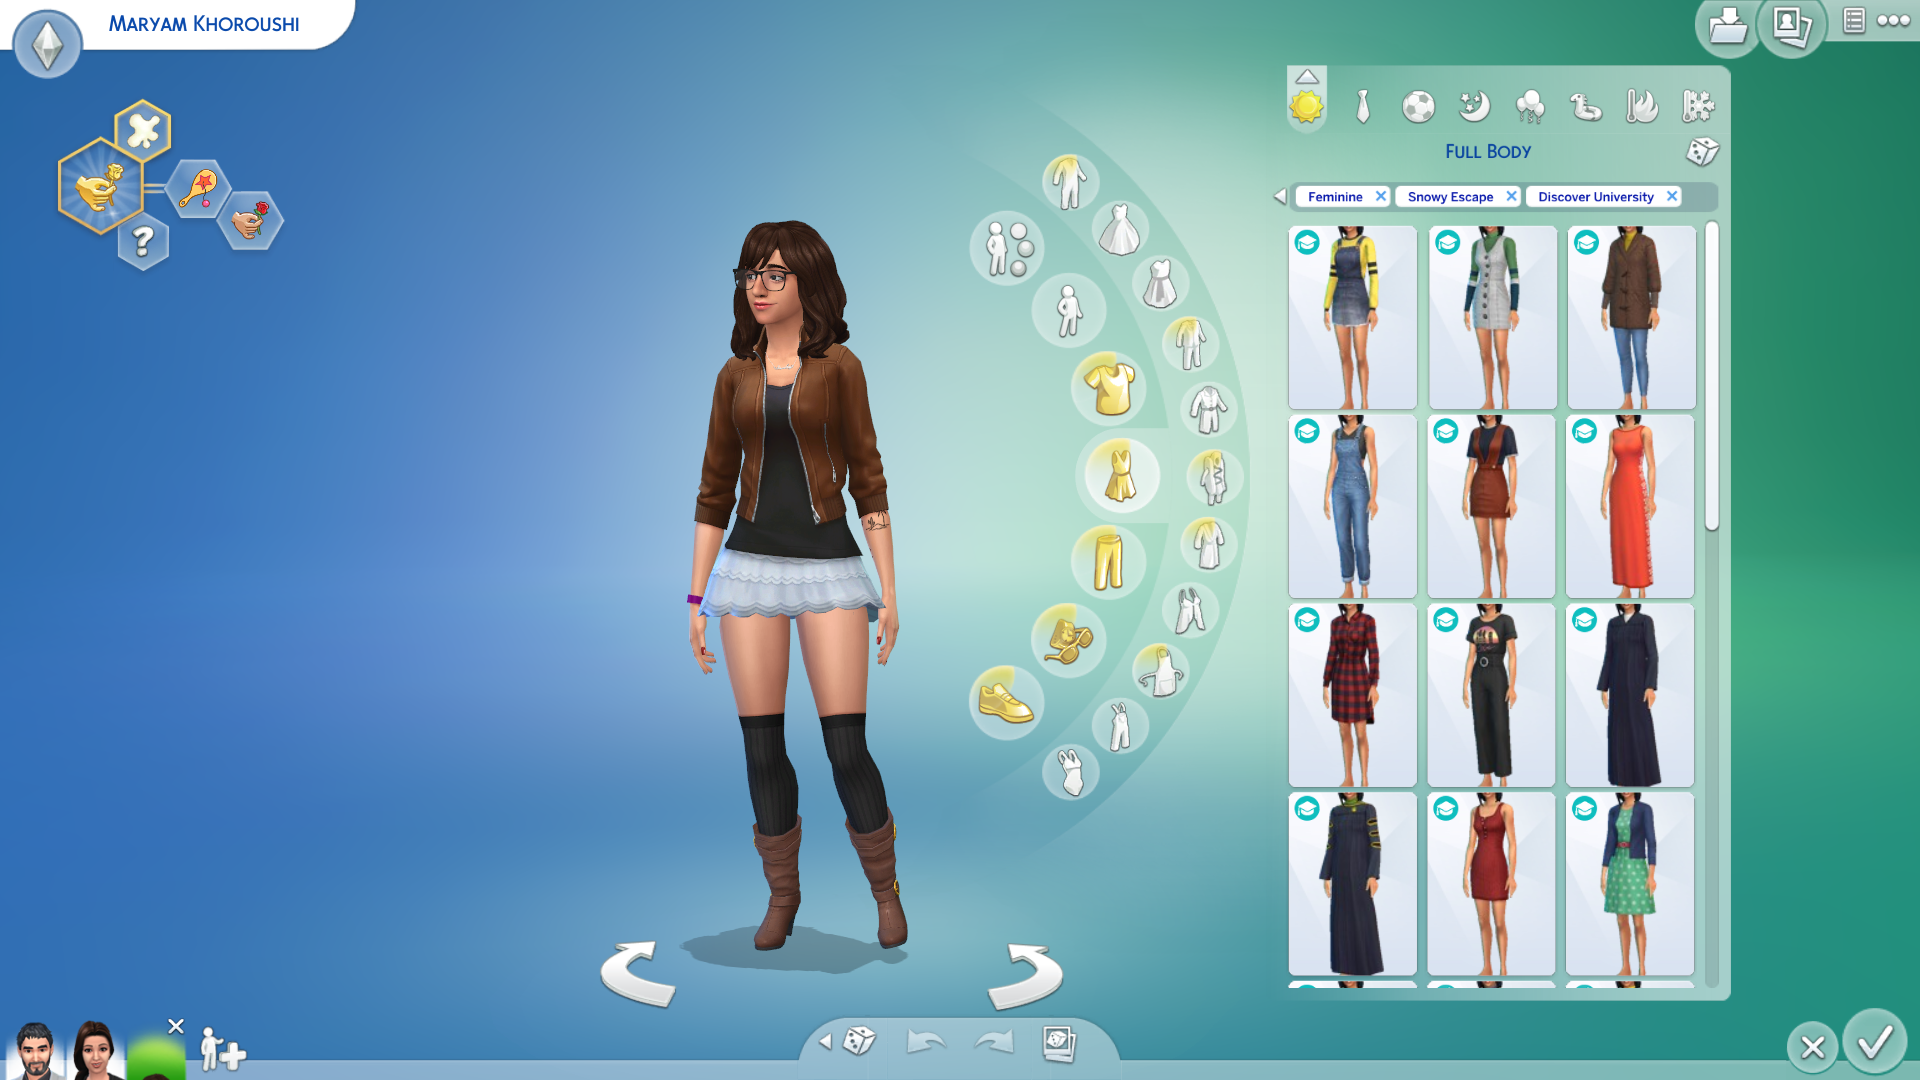 539228509_TheSims47_5_20214_59_04PM.png.32cc40f5c655bd9ac7aa591f9de12baa.png